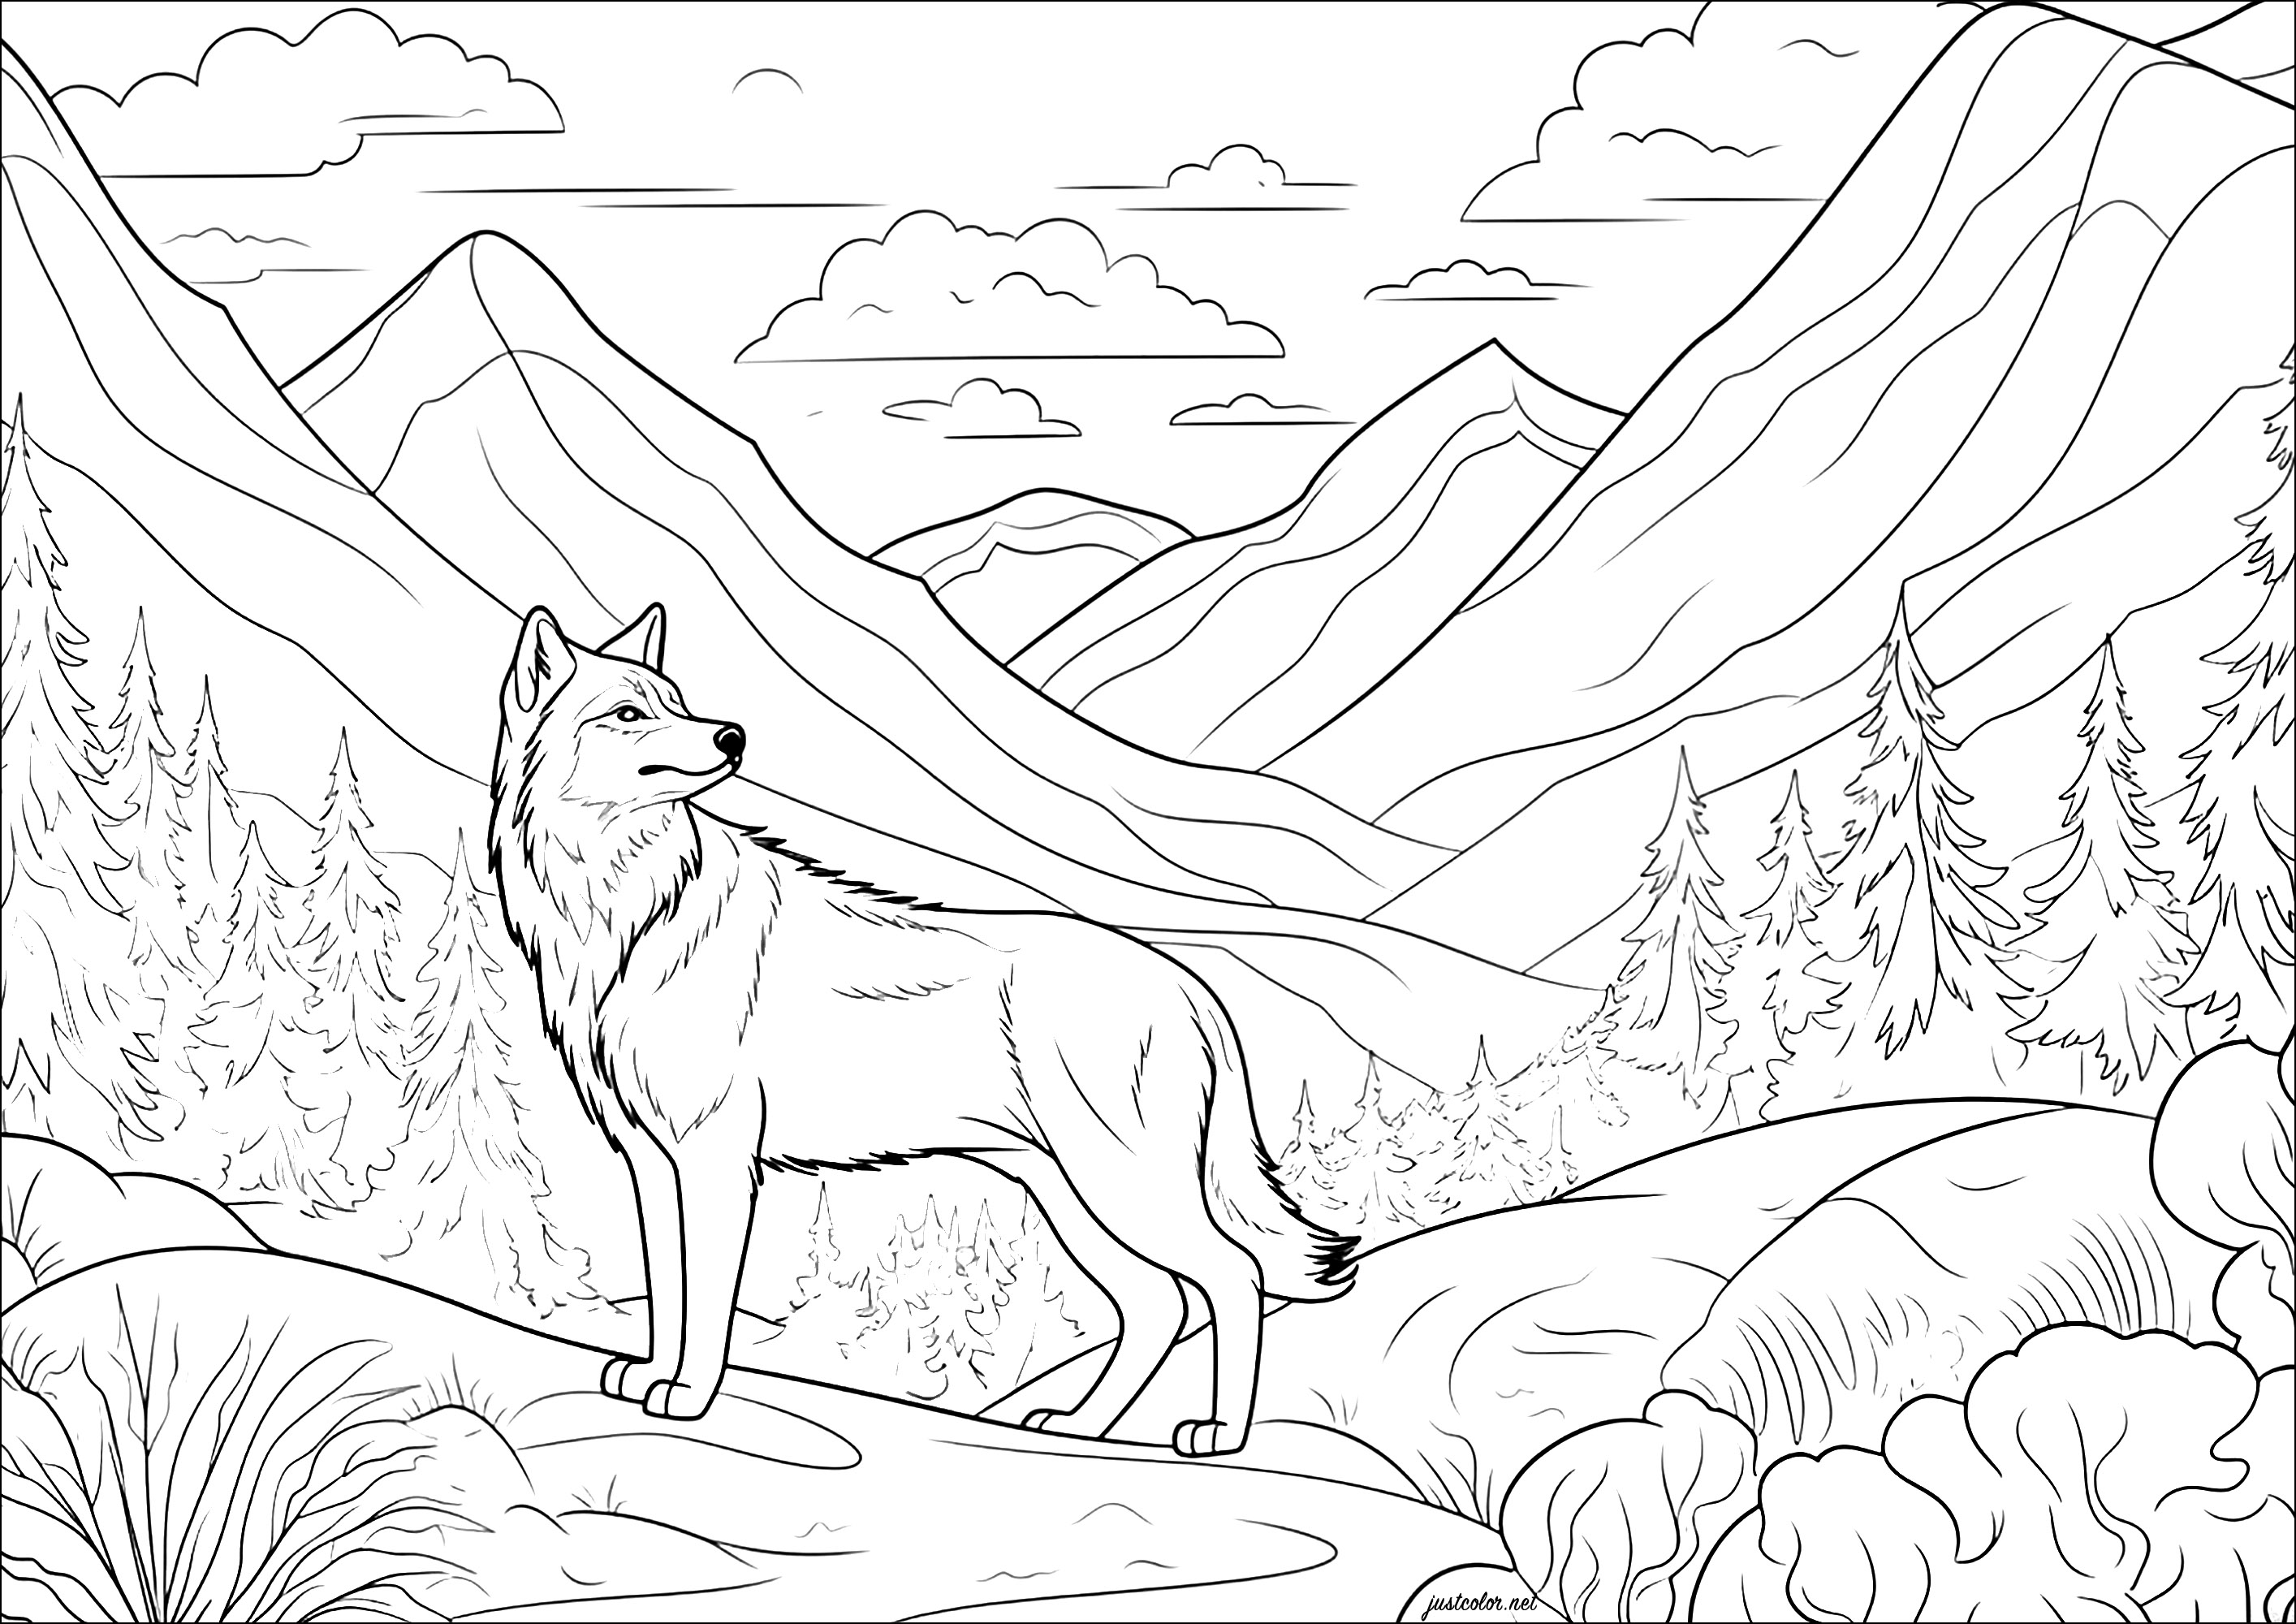 Wolfoo Pando Coloring Pages - Free Printable Coloring Pages